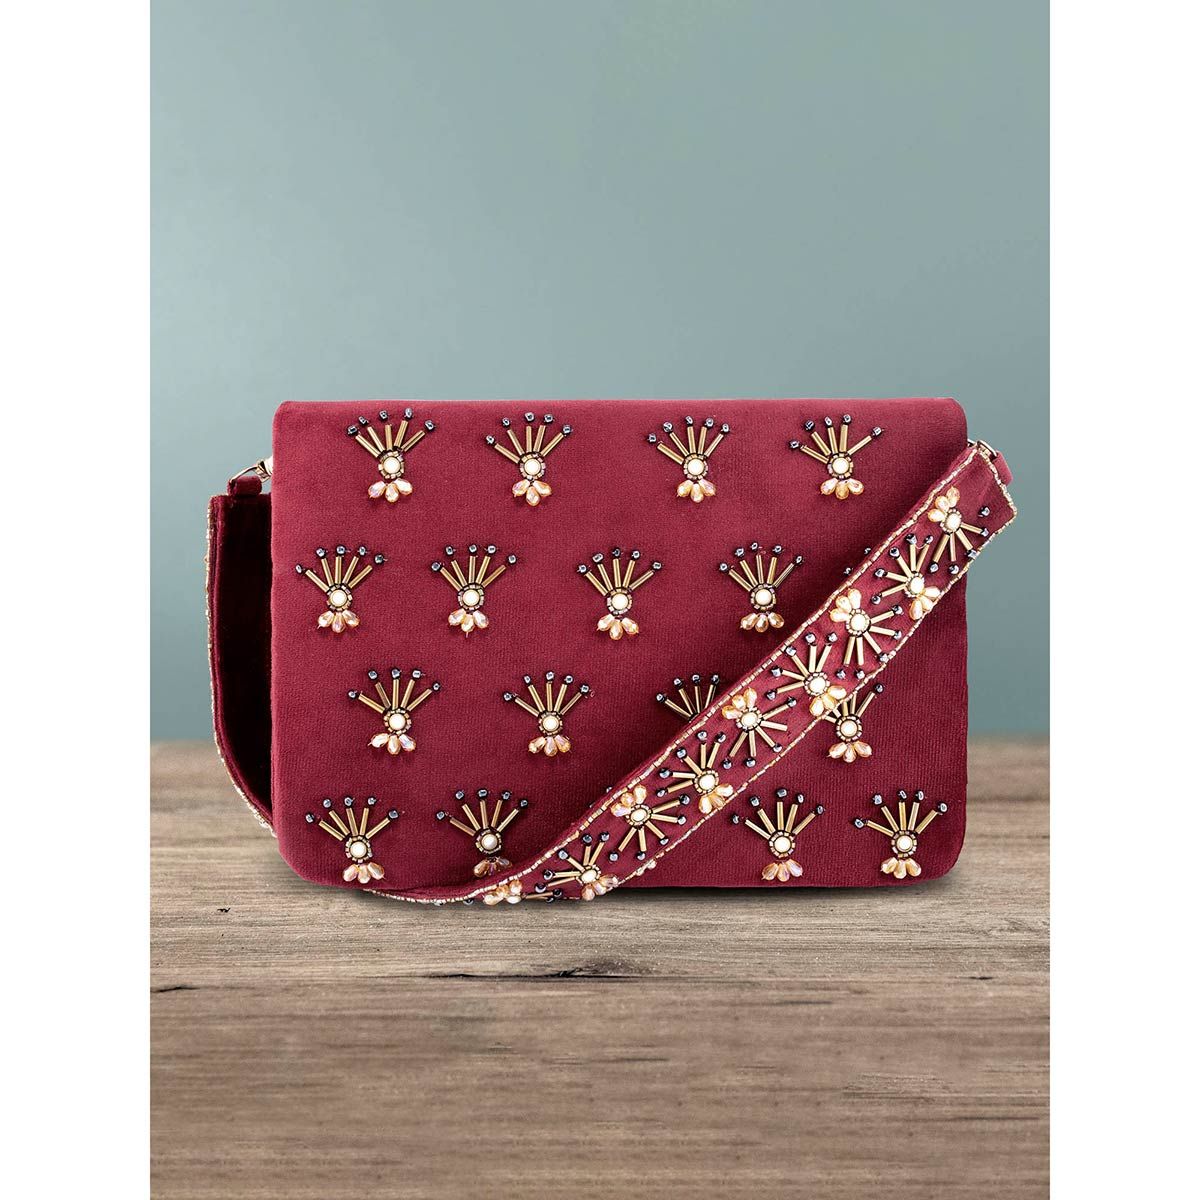 Peora Women Maroon Gold-Toned Embellished Purse Clutch -C86M (Maroon) At Nykaa, Best Beauty Products Online